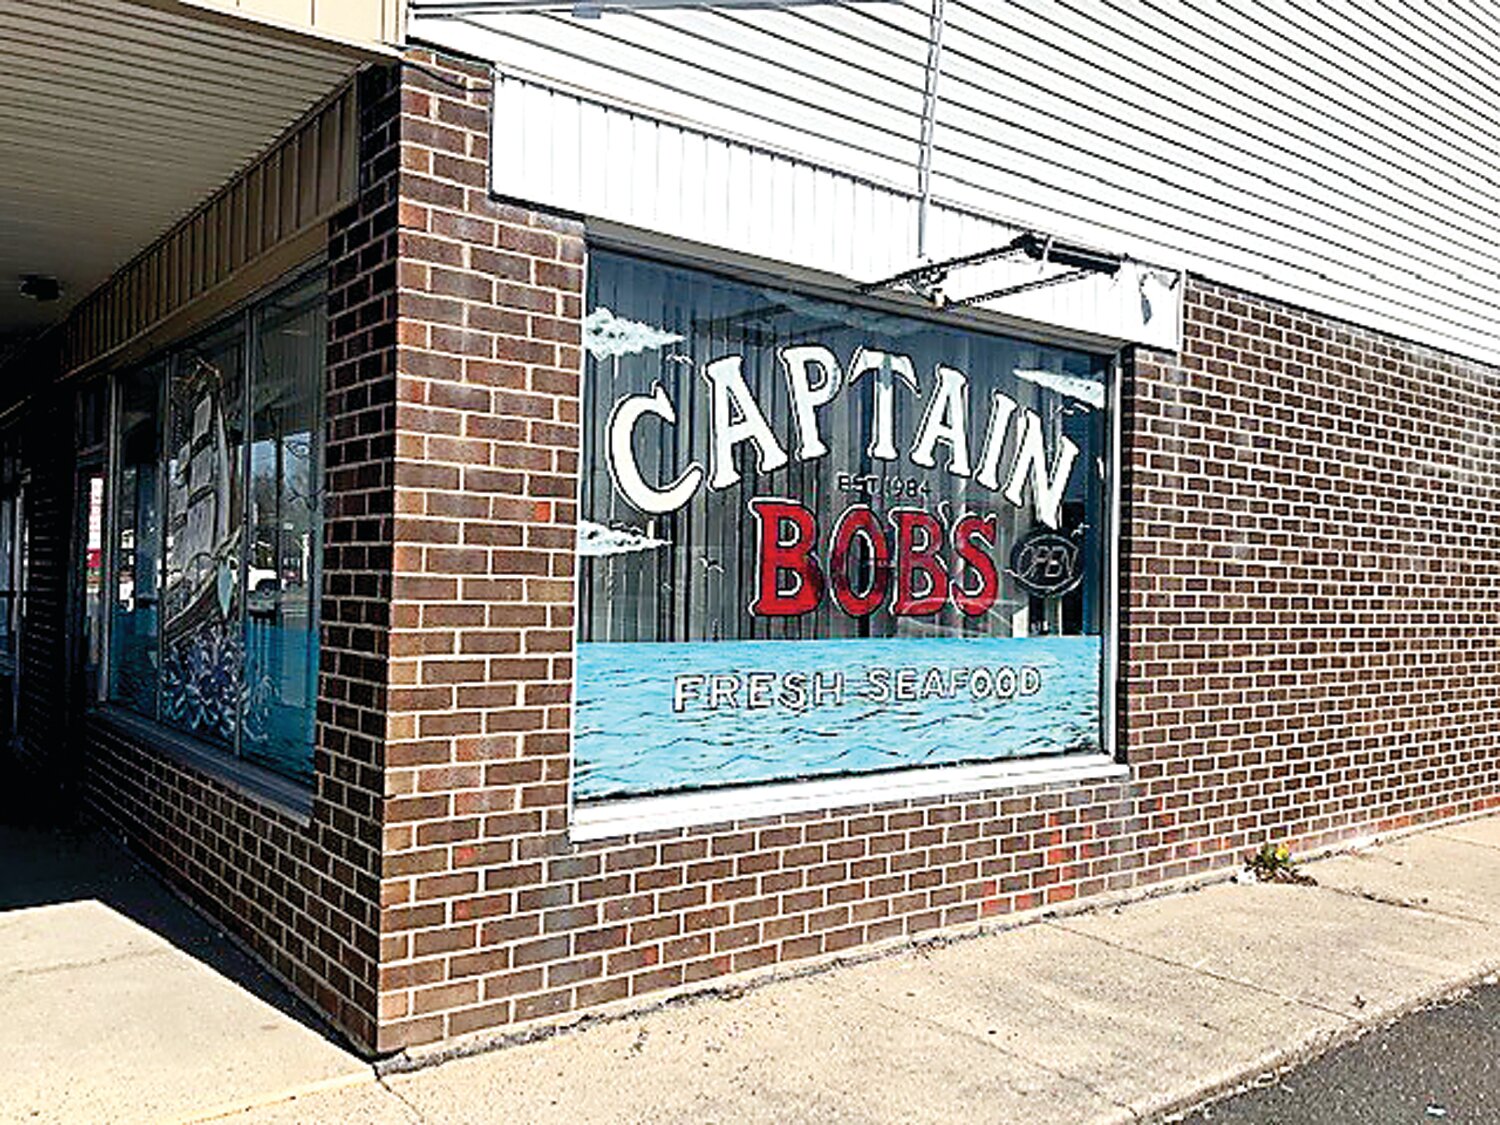 Captain Bob’s Seafood in Quakertown is one of the Bucks County restaurants that’s been hit regularly by oil cooking oil thefts over the past five years.